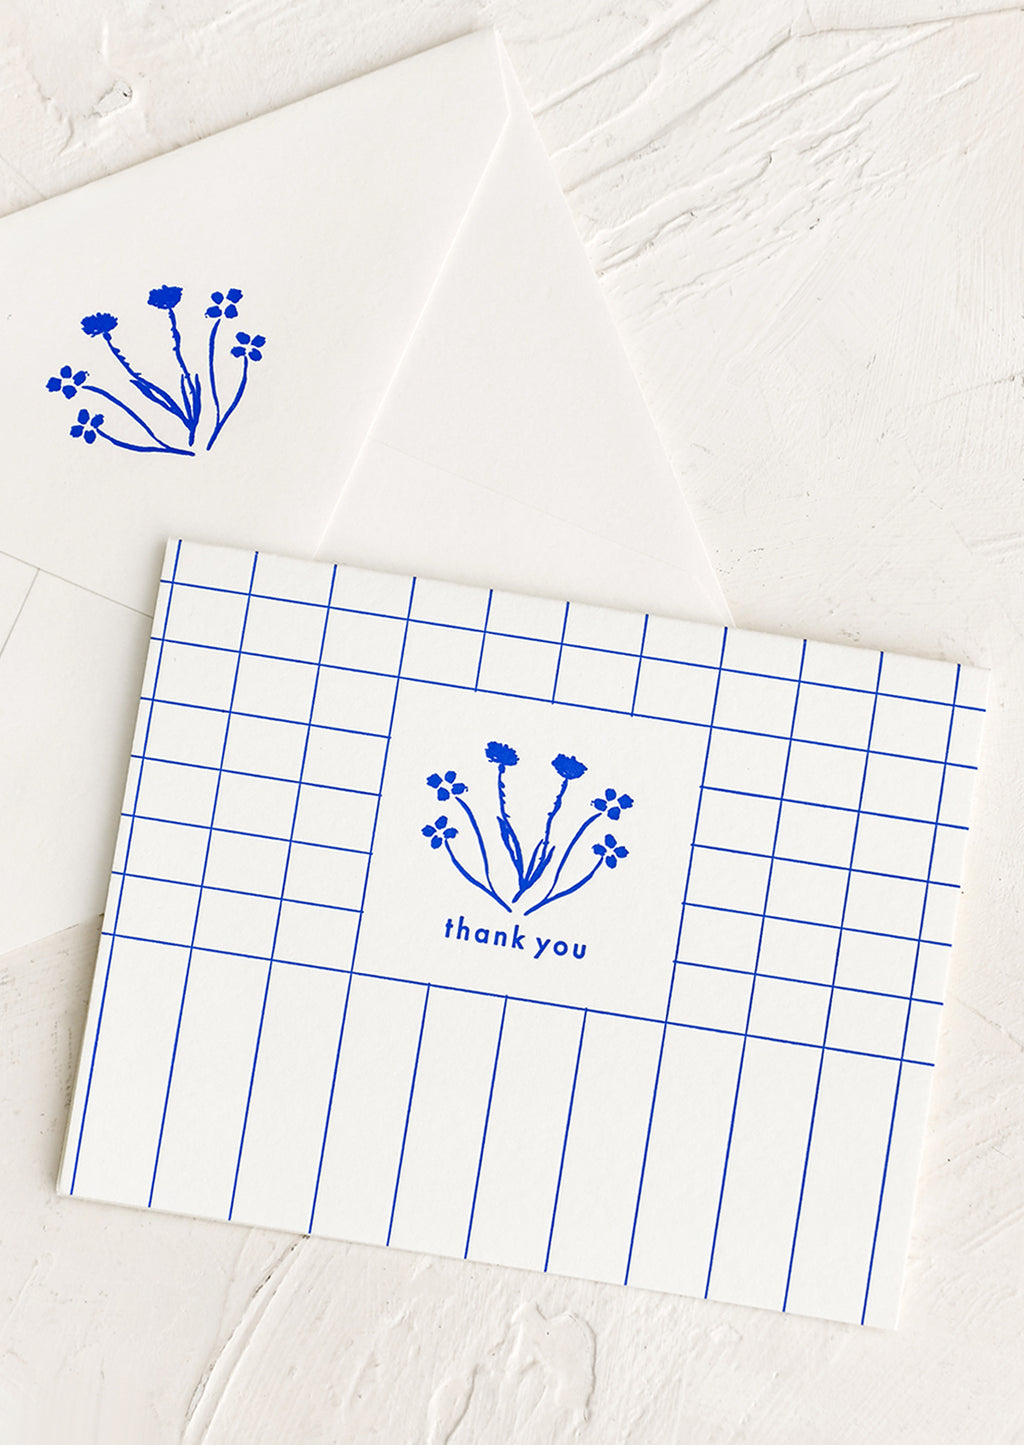 Single Card: A blue and white grid patterned thank you card with drawn floral imagery.